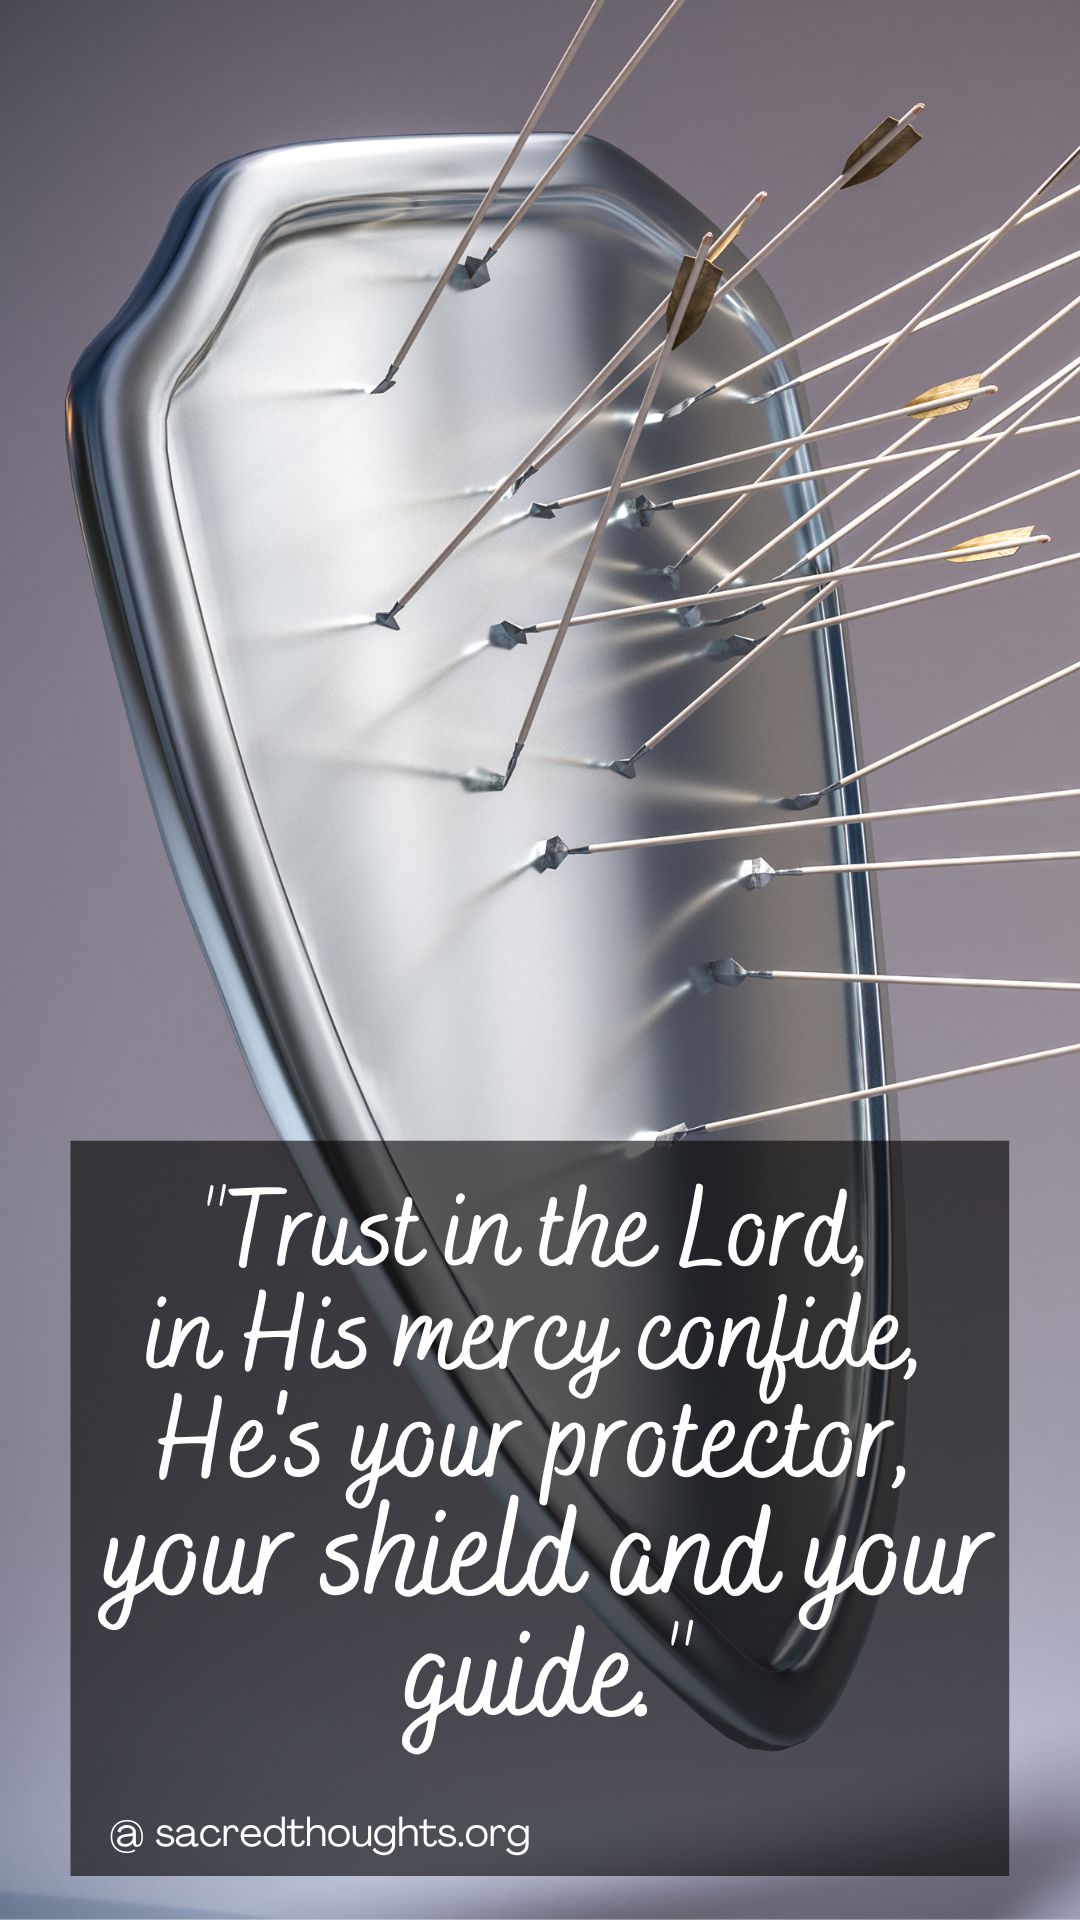 Shield with words Trust in the Lord, in His mercy confide, He's your protector, your shield and your guide.